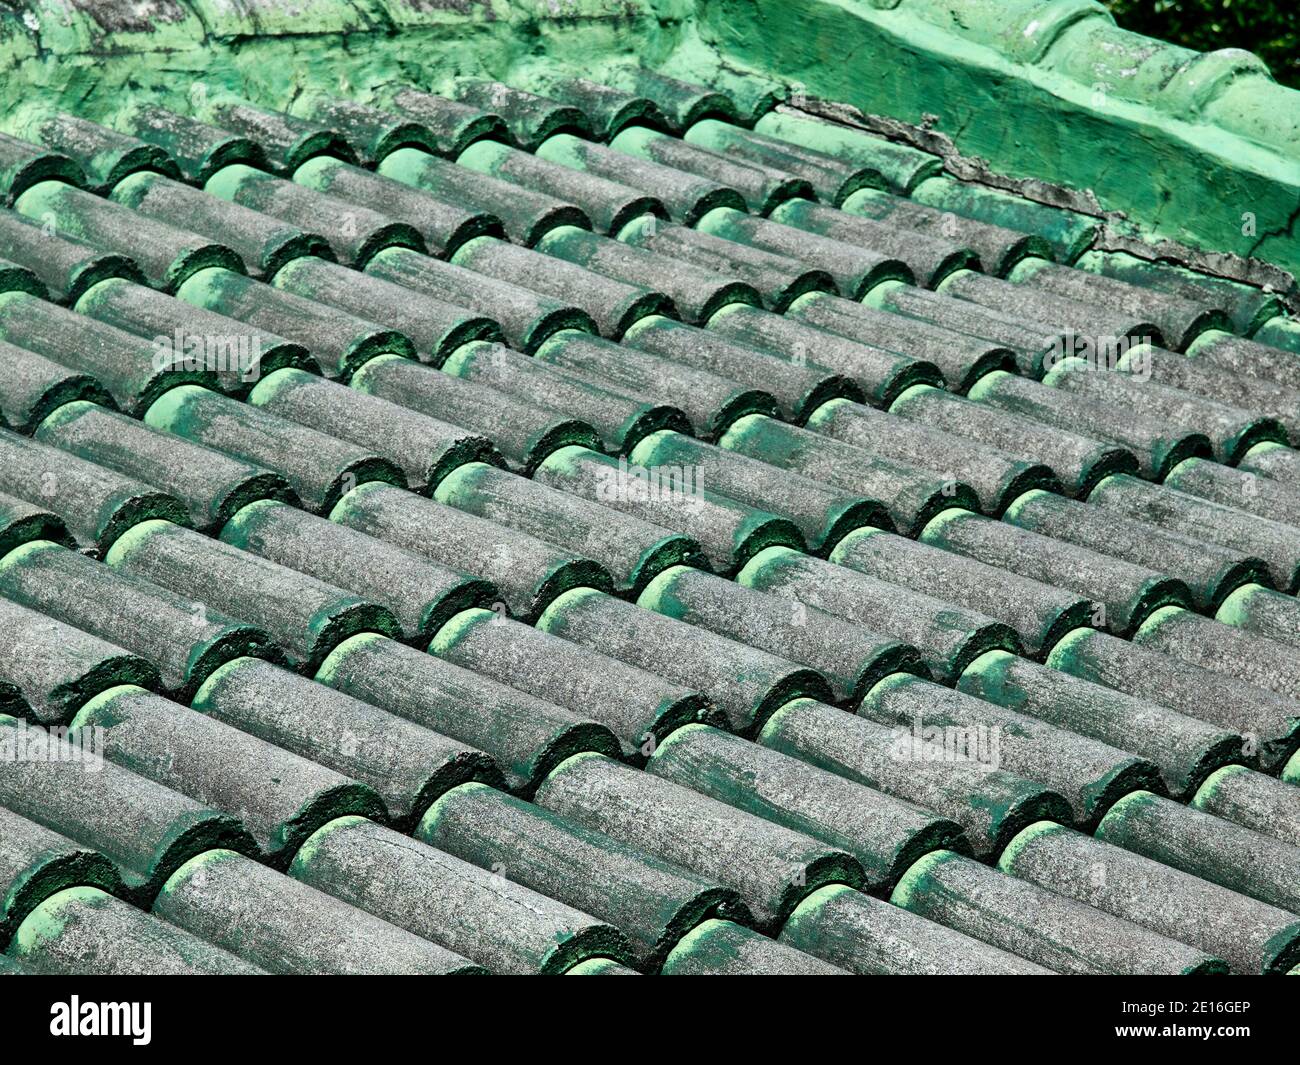 Old Roof Tiles - Some old weathered roof tiles near The People's Park, in Tagaytay, The Philippines. Stock Photo